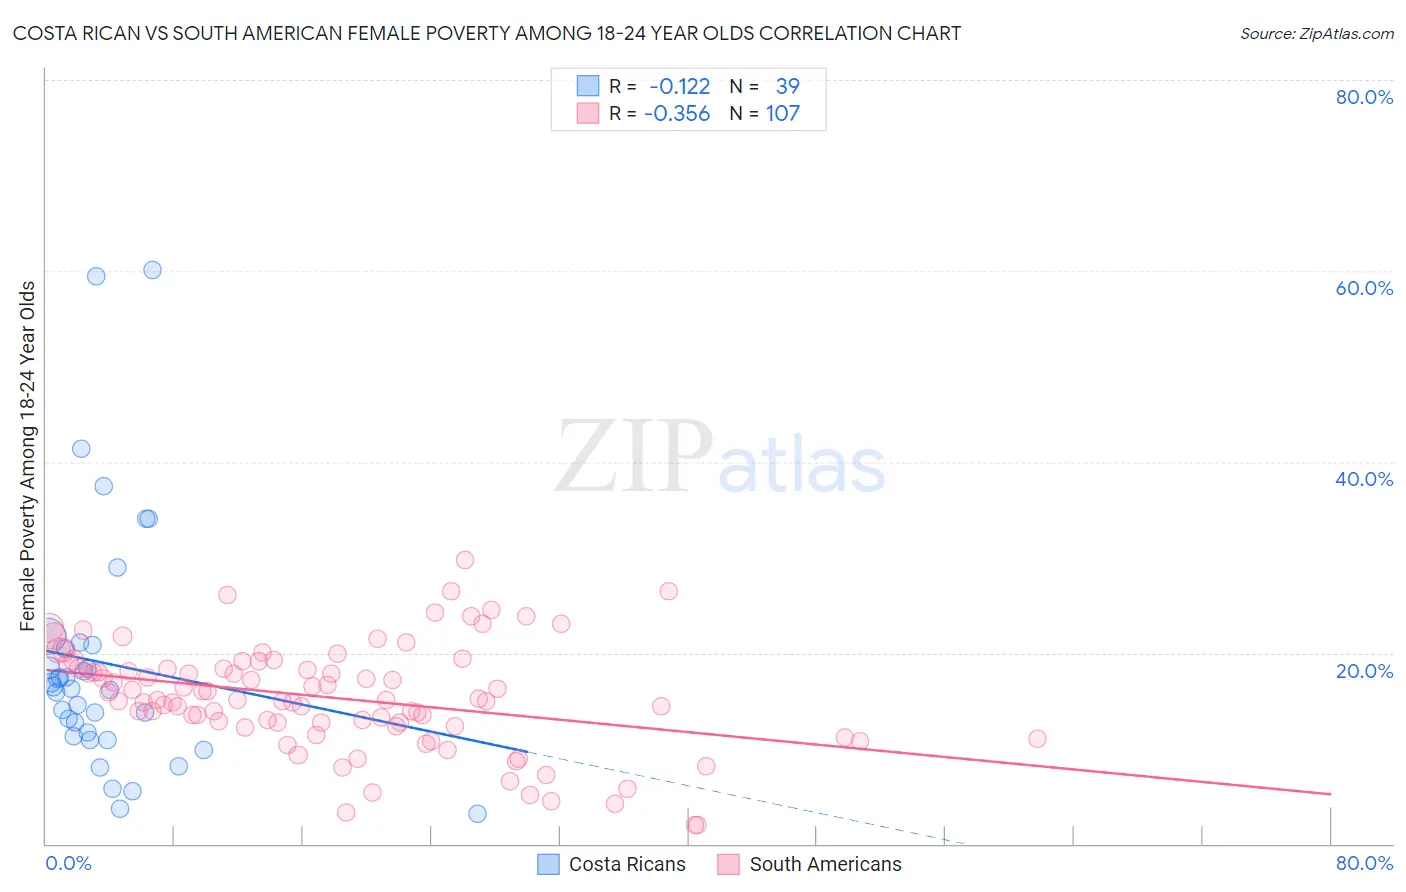 Costa Rican vs South American Female Poverty Among 18-24 Year Olds